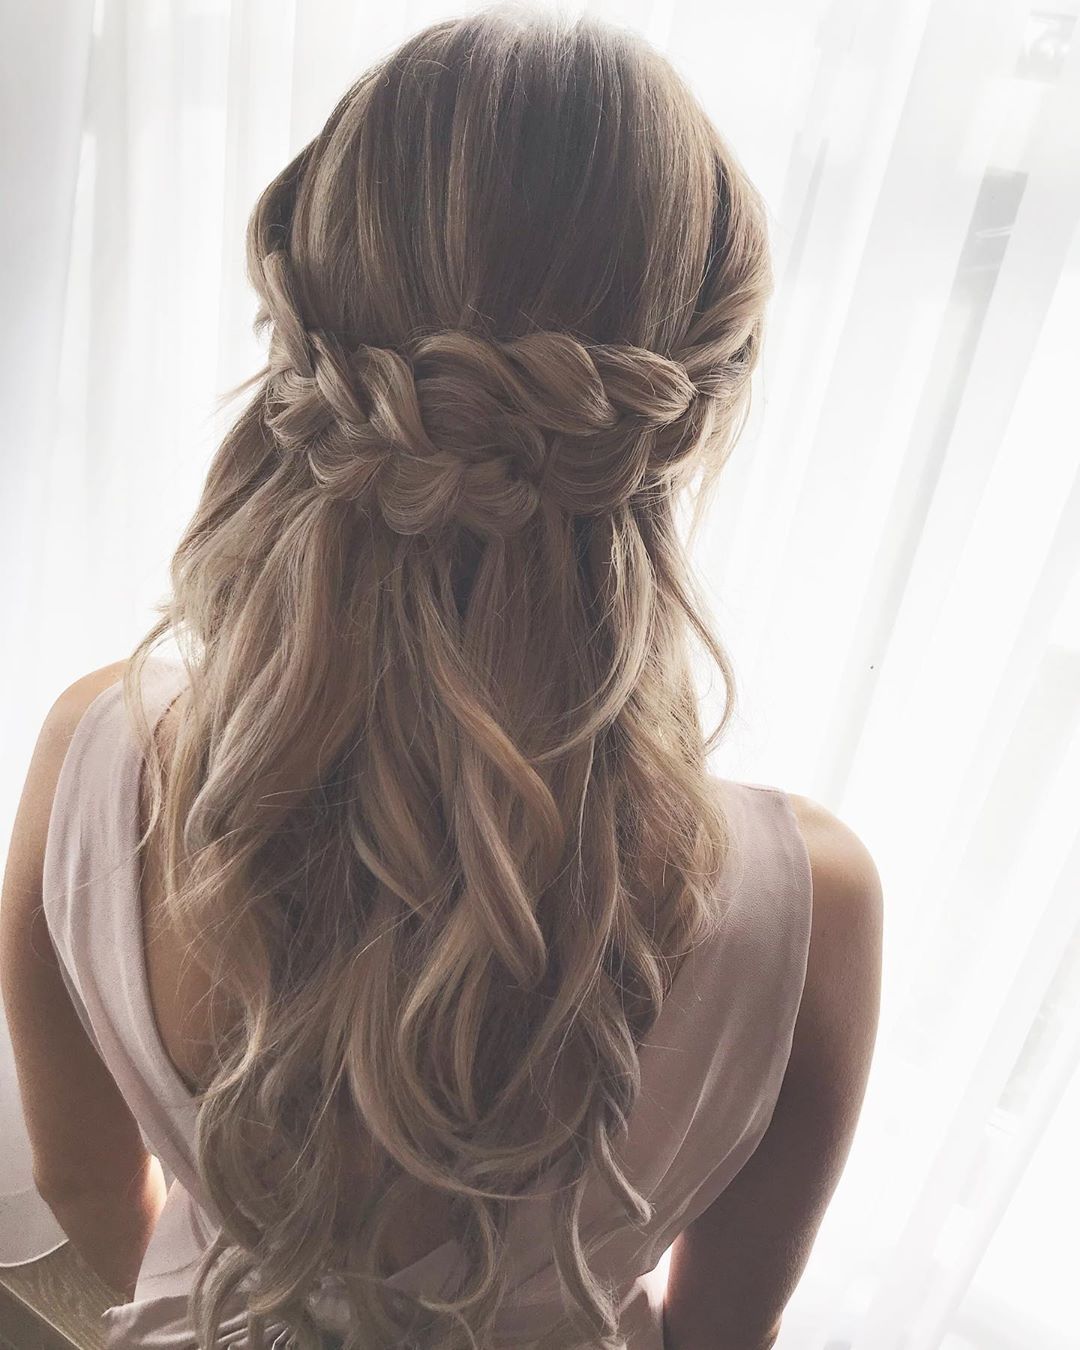 Most Recently Released Simplified Waterfall Braid Wedding Hairstyles Inside 50 Awesome Waterfall Braid You Can Do At Home – Short Pixie Cuts (Gallery 20 of 20)